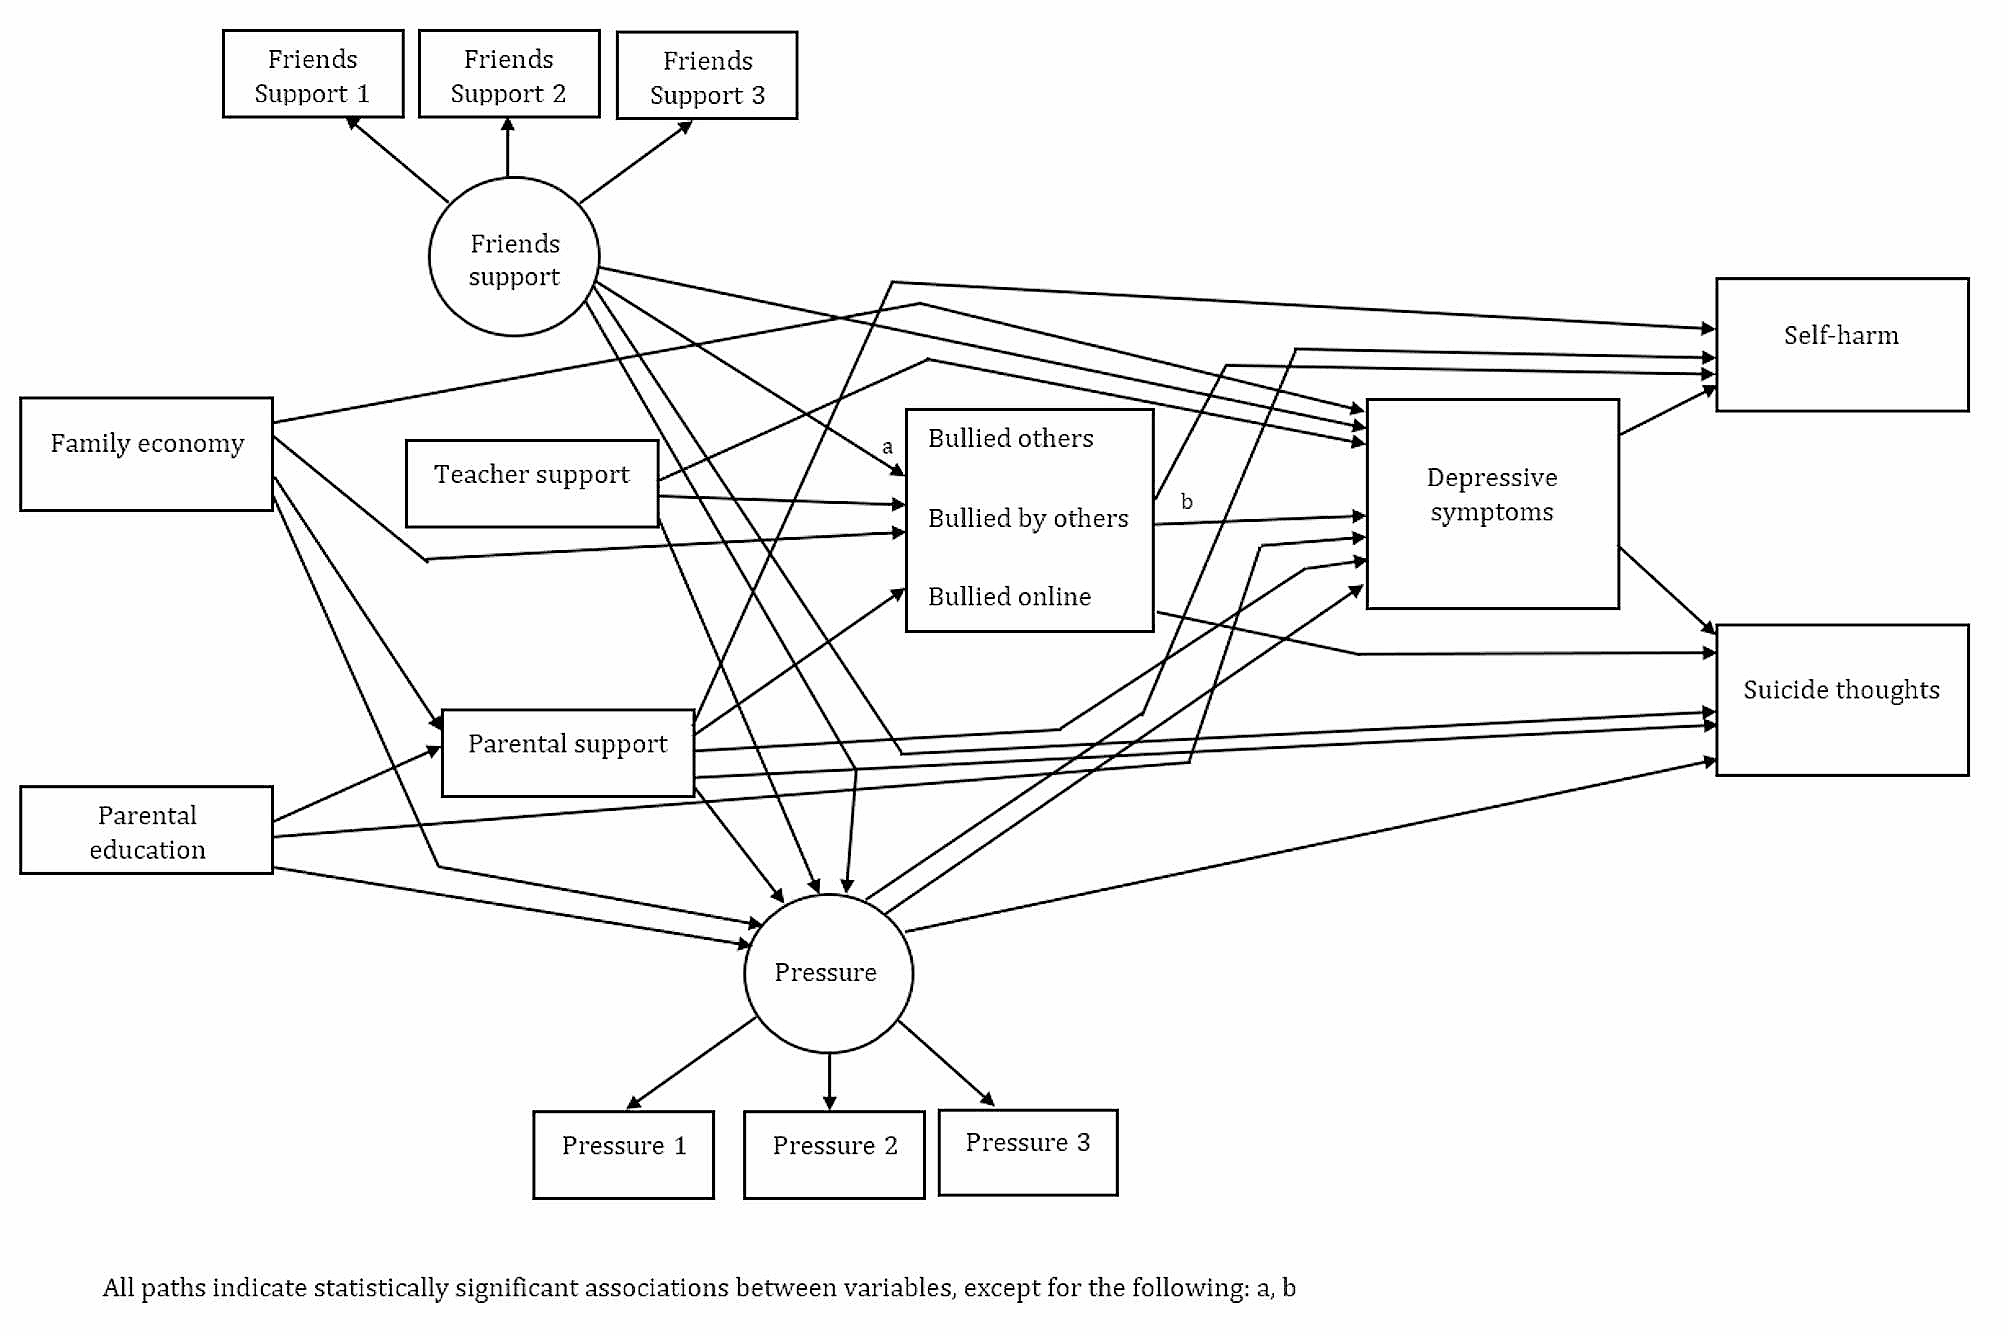 Are social pressure, bullying and low social support associated with depressive symptoms, self-harm and self-directed violence among adolescents? A cross-sectional study using a structural equation modeling approach